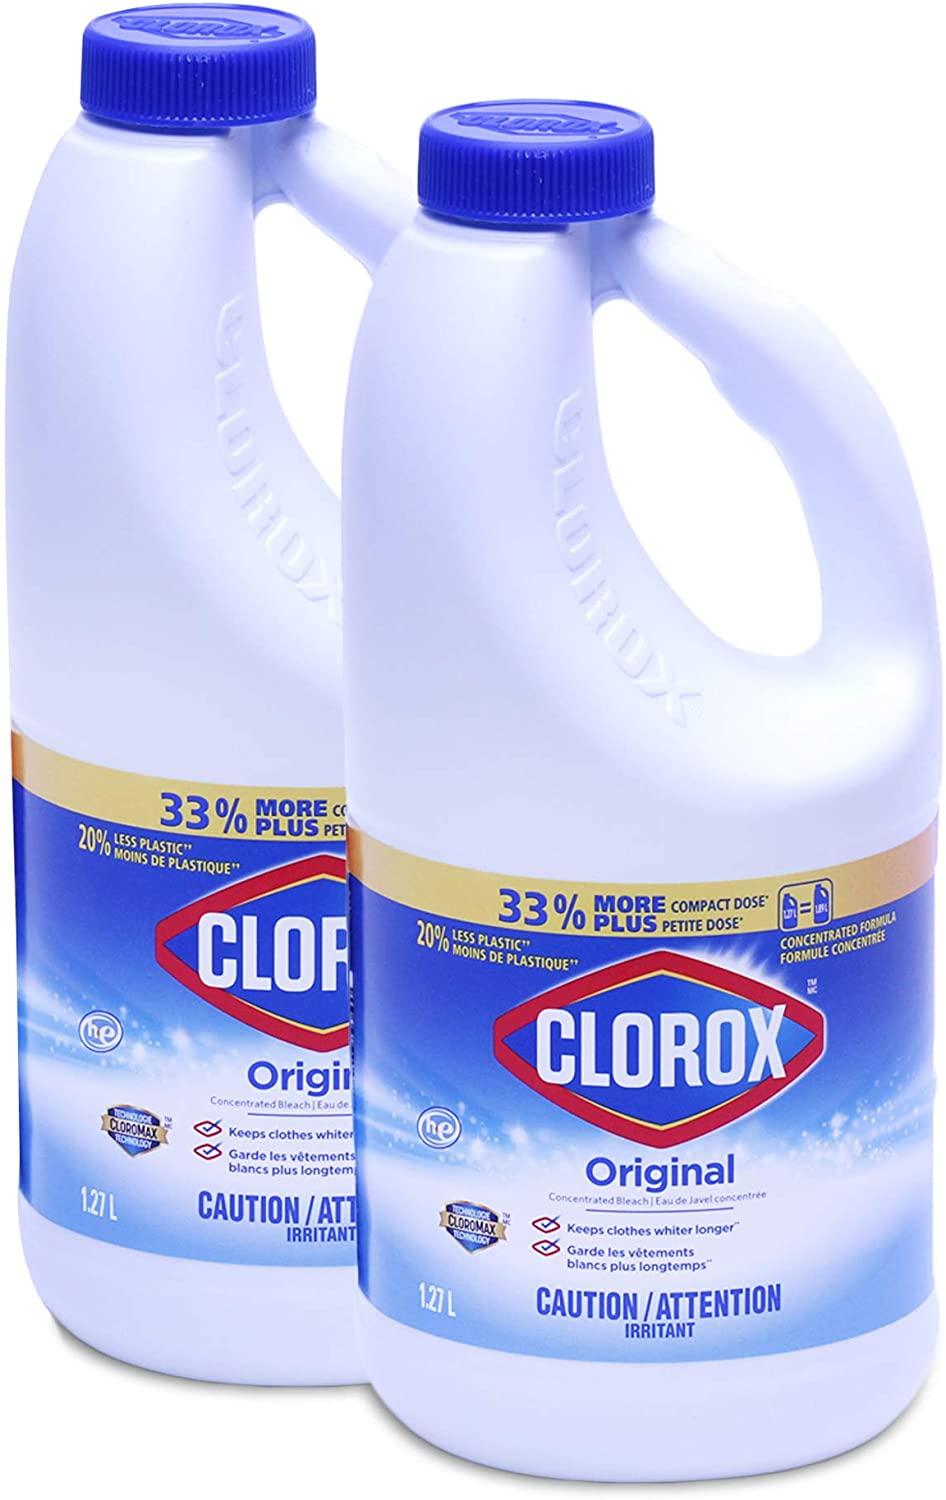 Clorox® Disinfecting Bleach with CLOROMAX® – Concentrated Formula